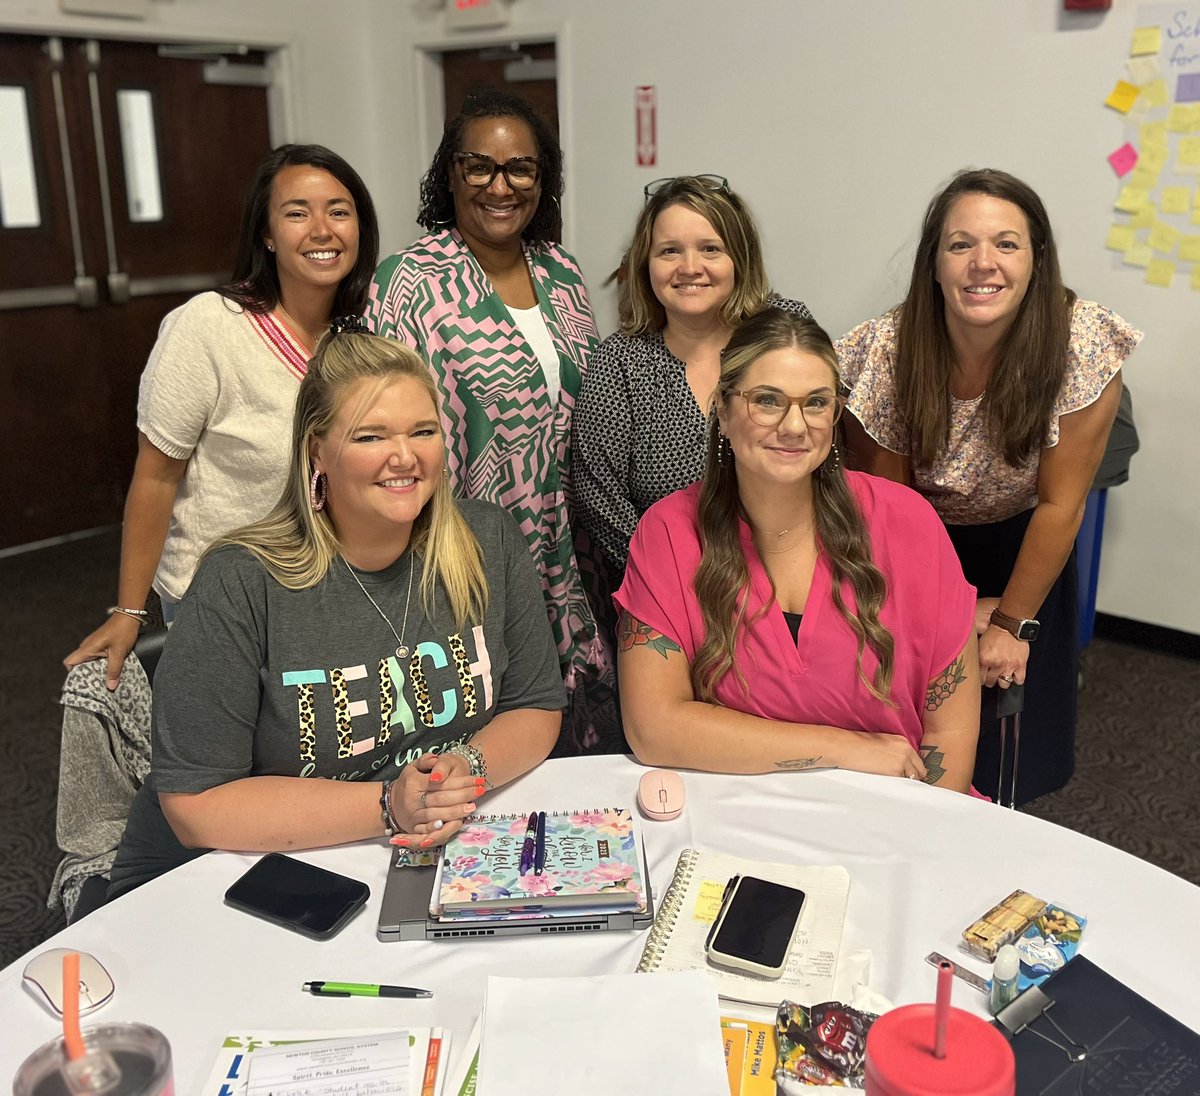 3 days of fabulous PLC with fabulous people. 'You promote what you permit.' #guidingcoalition #enespawpride #ncssbethebest @JoshRay711